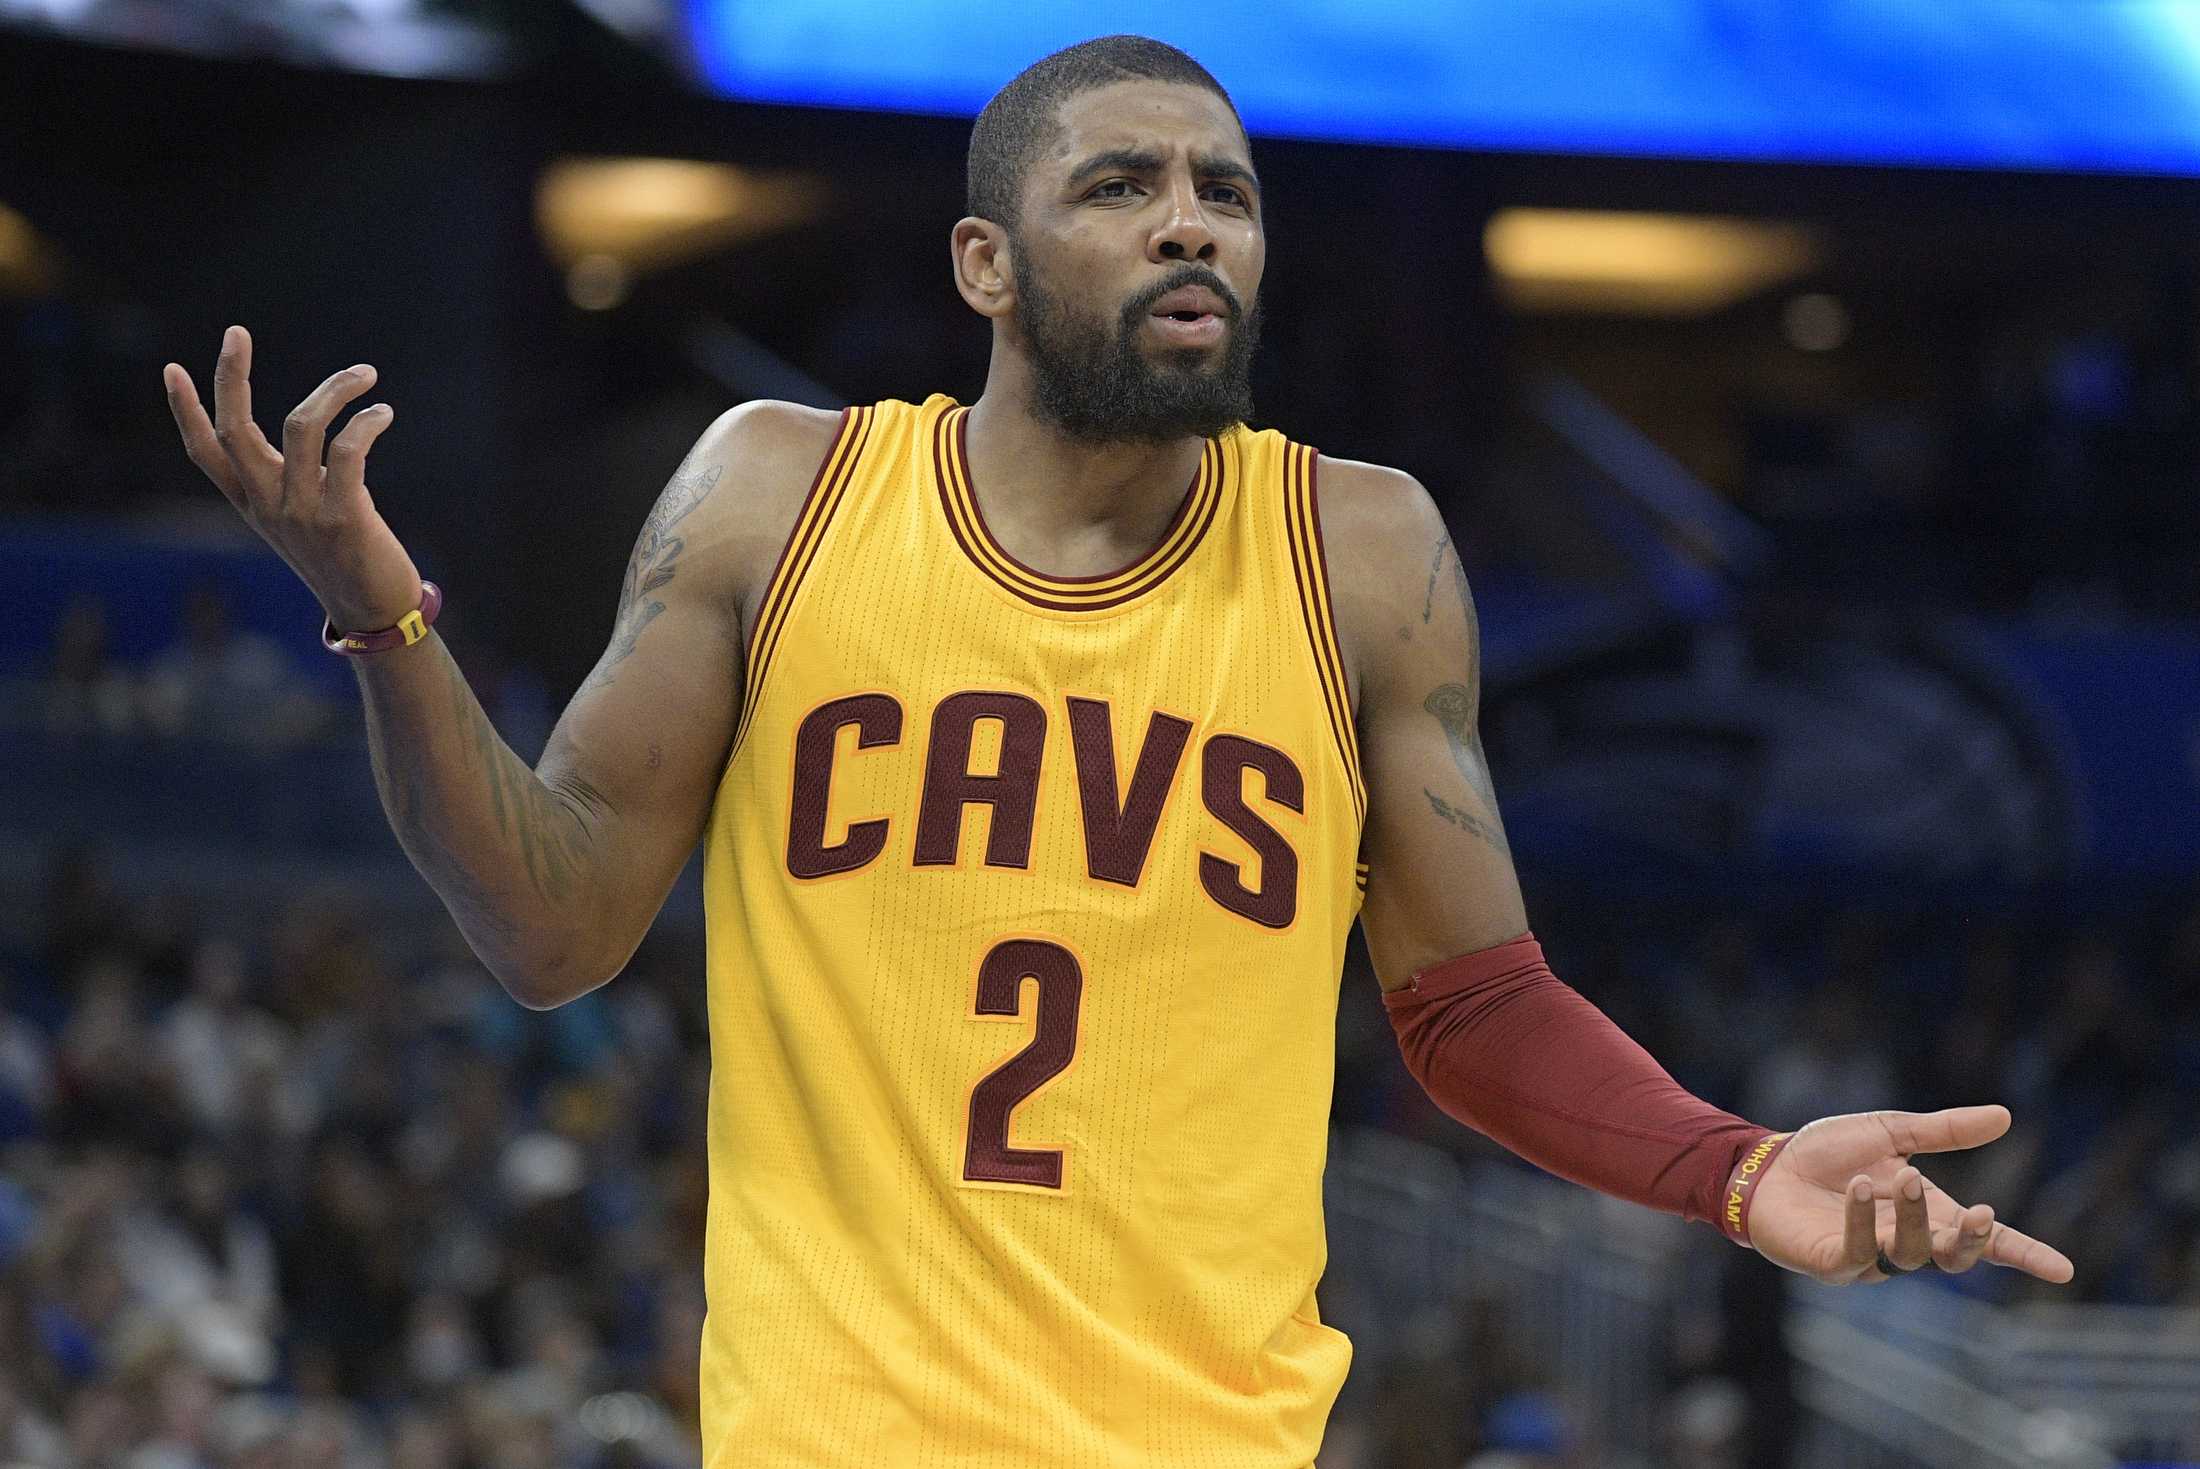 How many championship rings will Kyrie Irving have before LeBron James  retires? - Quora